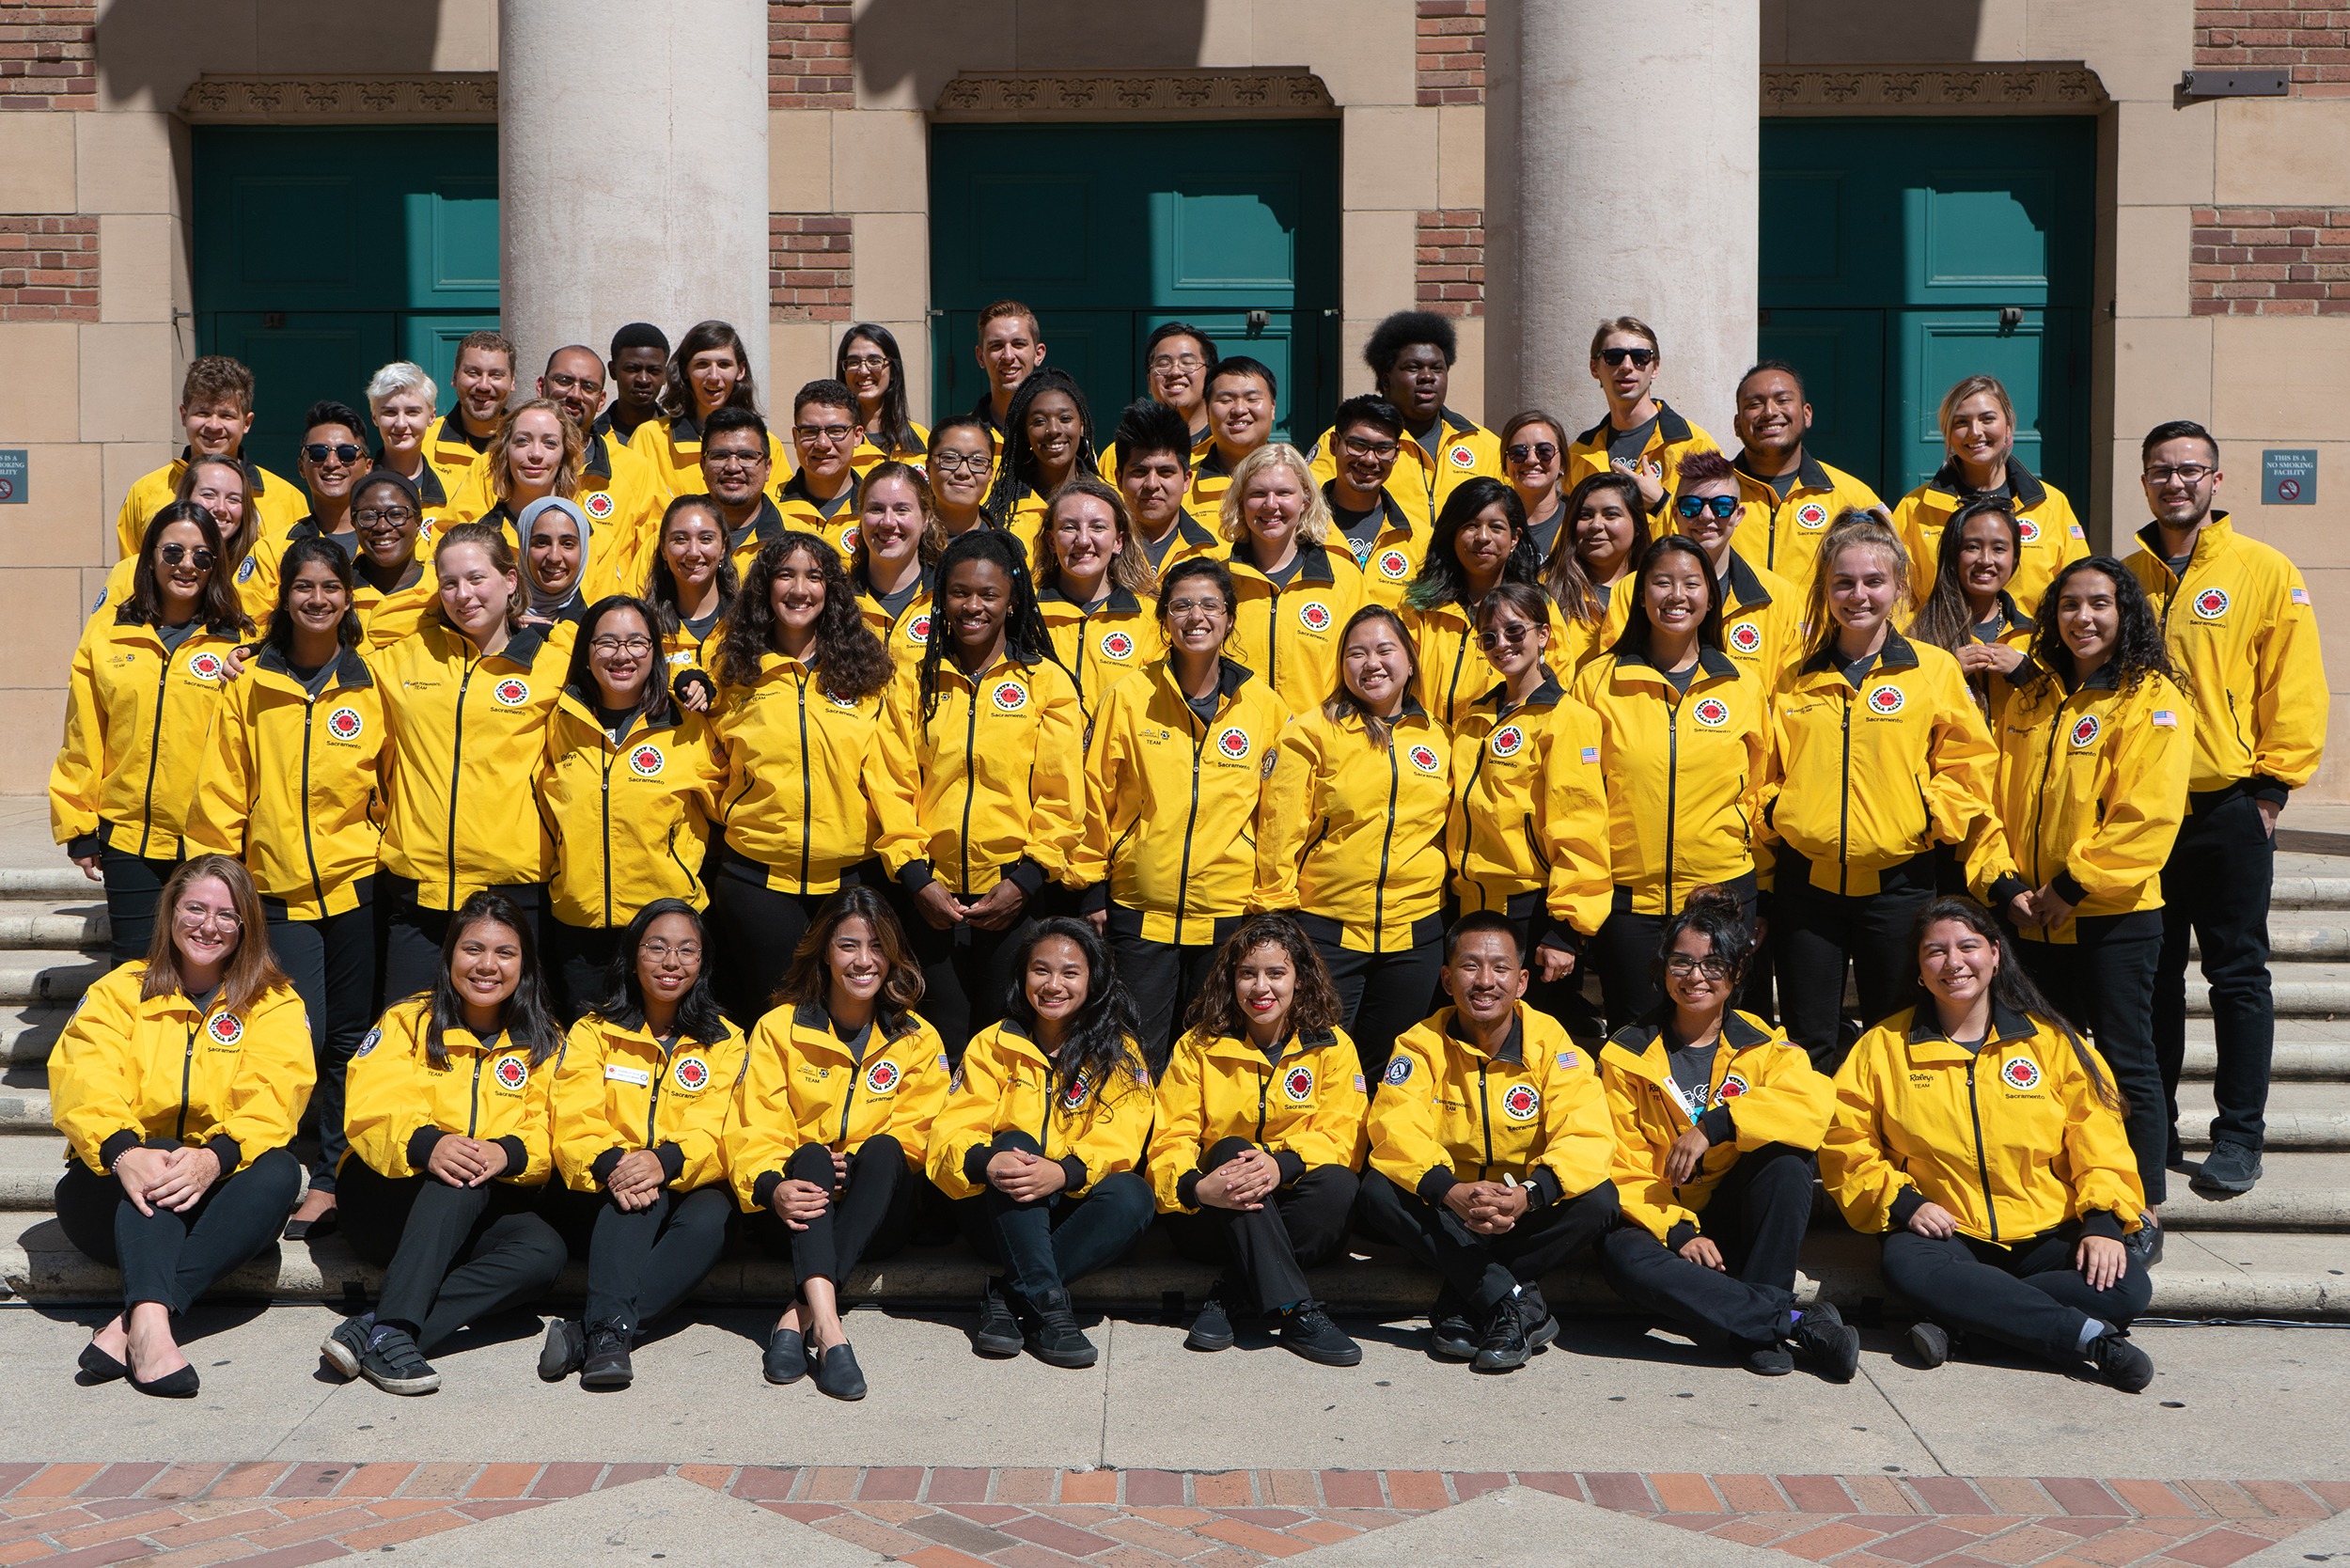 62 corps members wearing yellow jackets pose for the camera